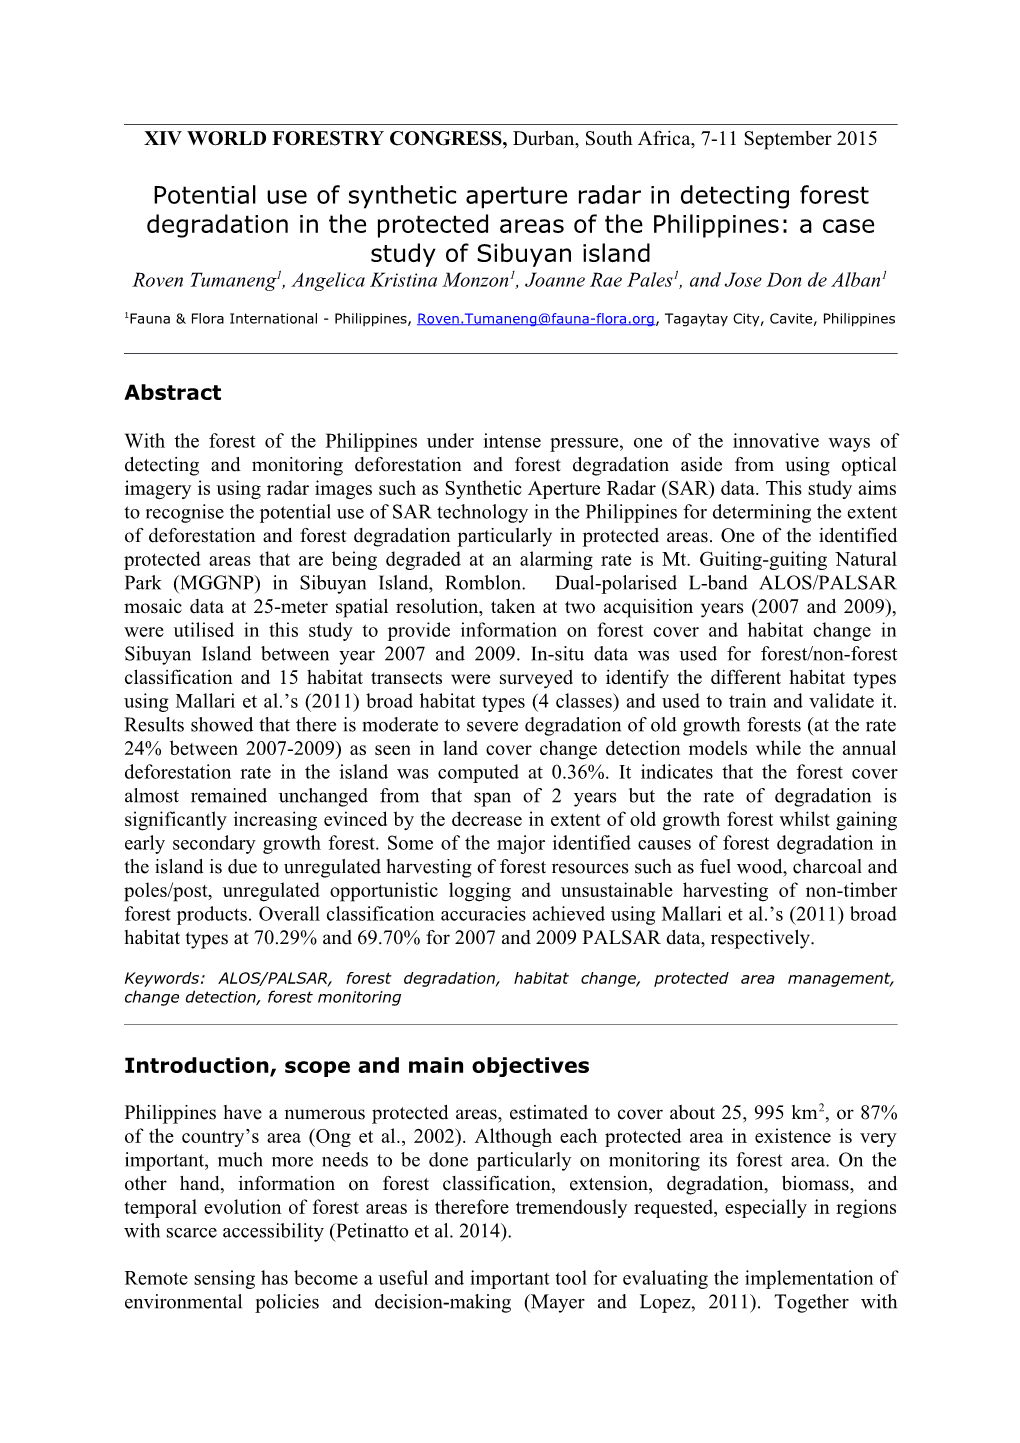 Potential Use of Synthetic Aperture Radar in Detecting Forest Degradation in the Protected Areas of the Philippines: a Case Stud